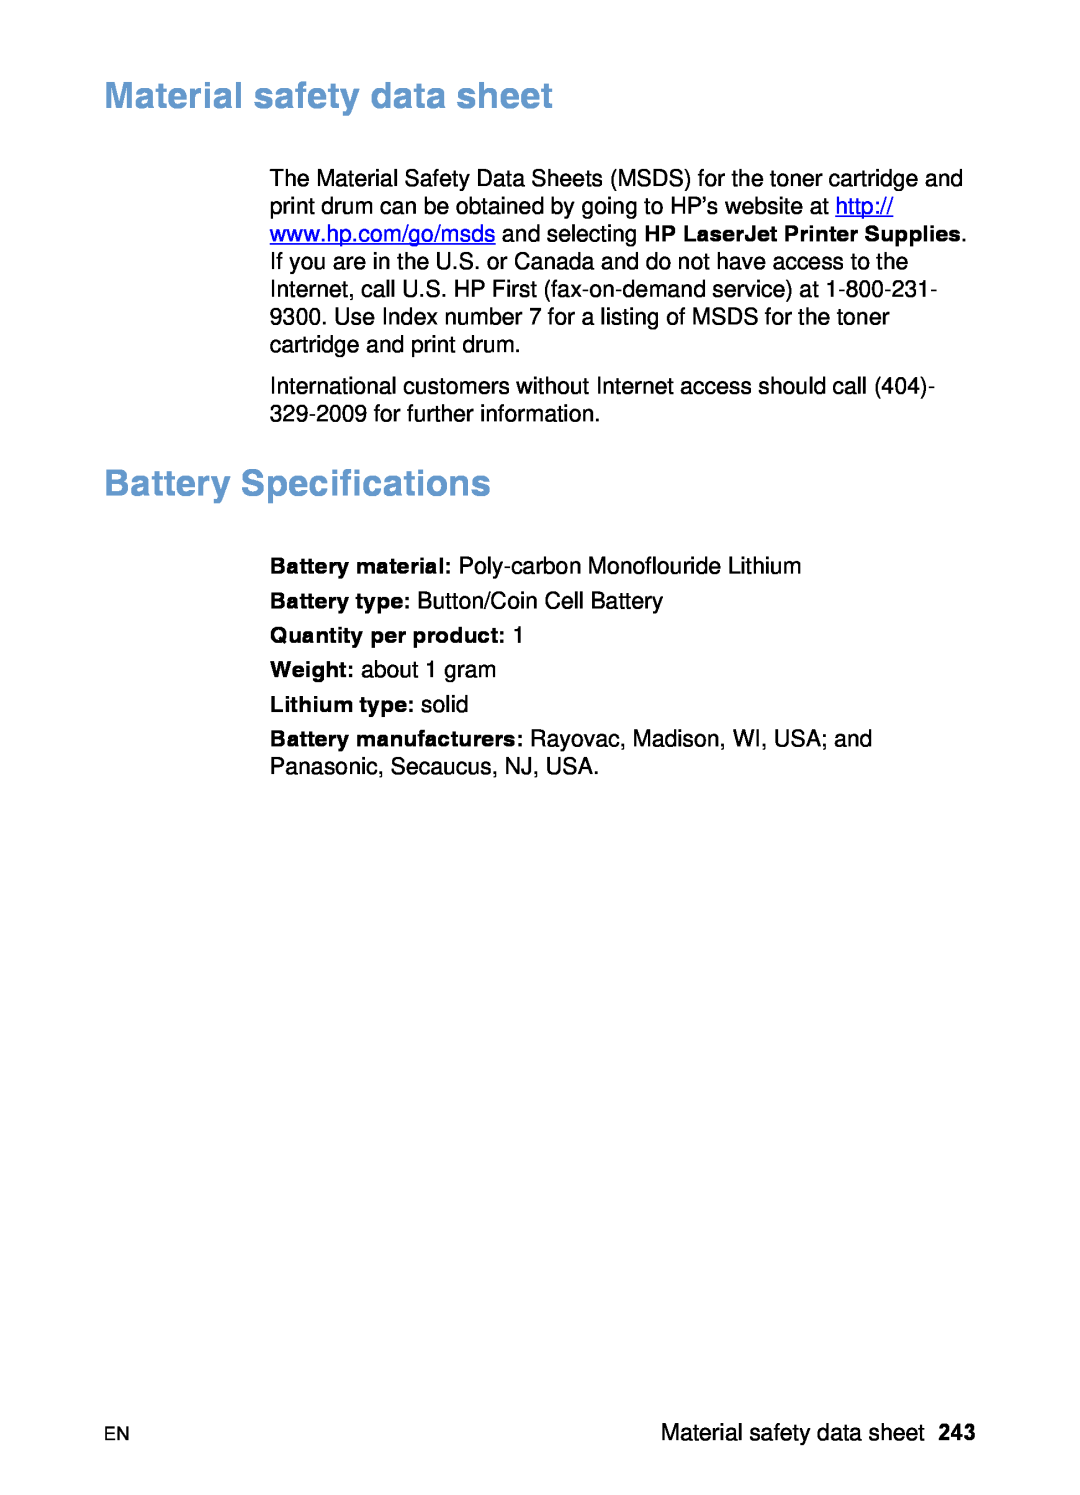 HP 3200 manual Material safety data sheet, Battery Specifications, Quantity per product, Lithium type solid 